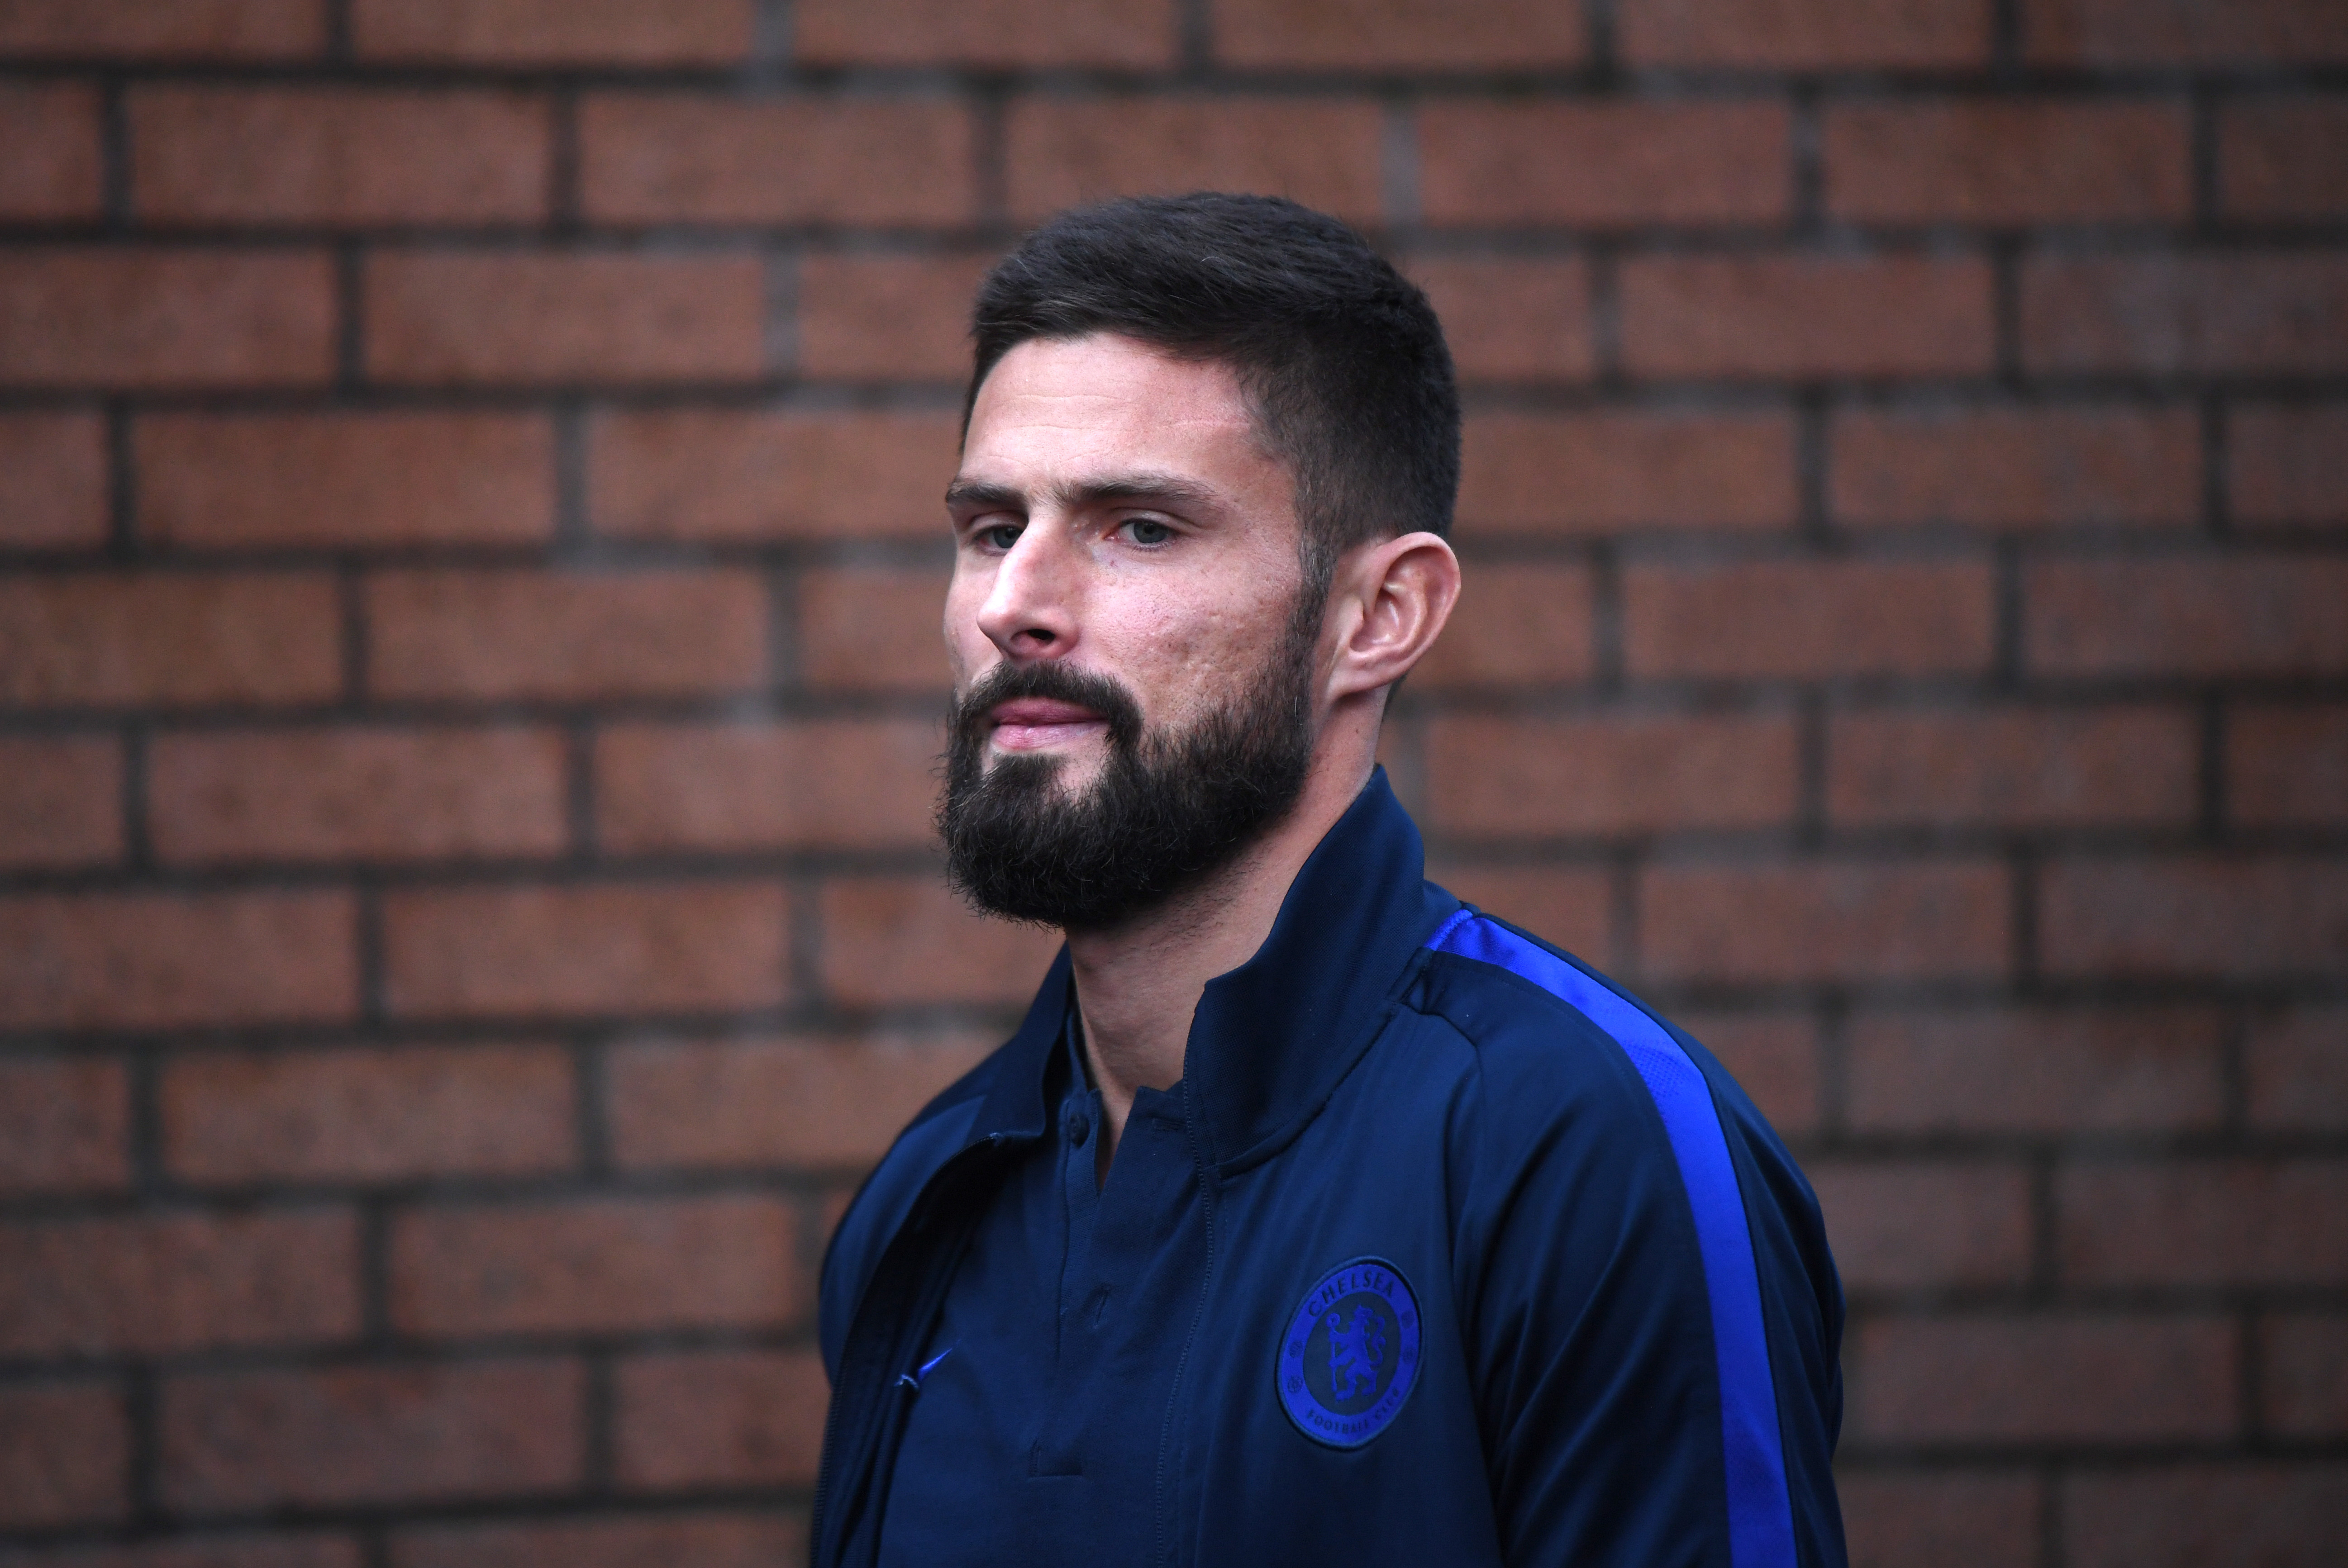 BURNLEY, ENGLAND - OCTOBER 26: Olivier Giroud of Chelsea arrives at the stadium prior to the Premier League match between Burnley FC and Chelsea FC at Turf Moor on October 26, 2019 in Burnley, United Kingdom. (Photo by Laurence Griffiths/Getty Images)